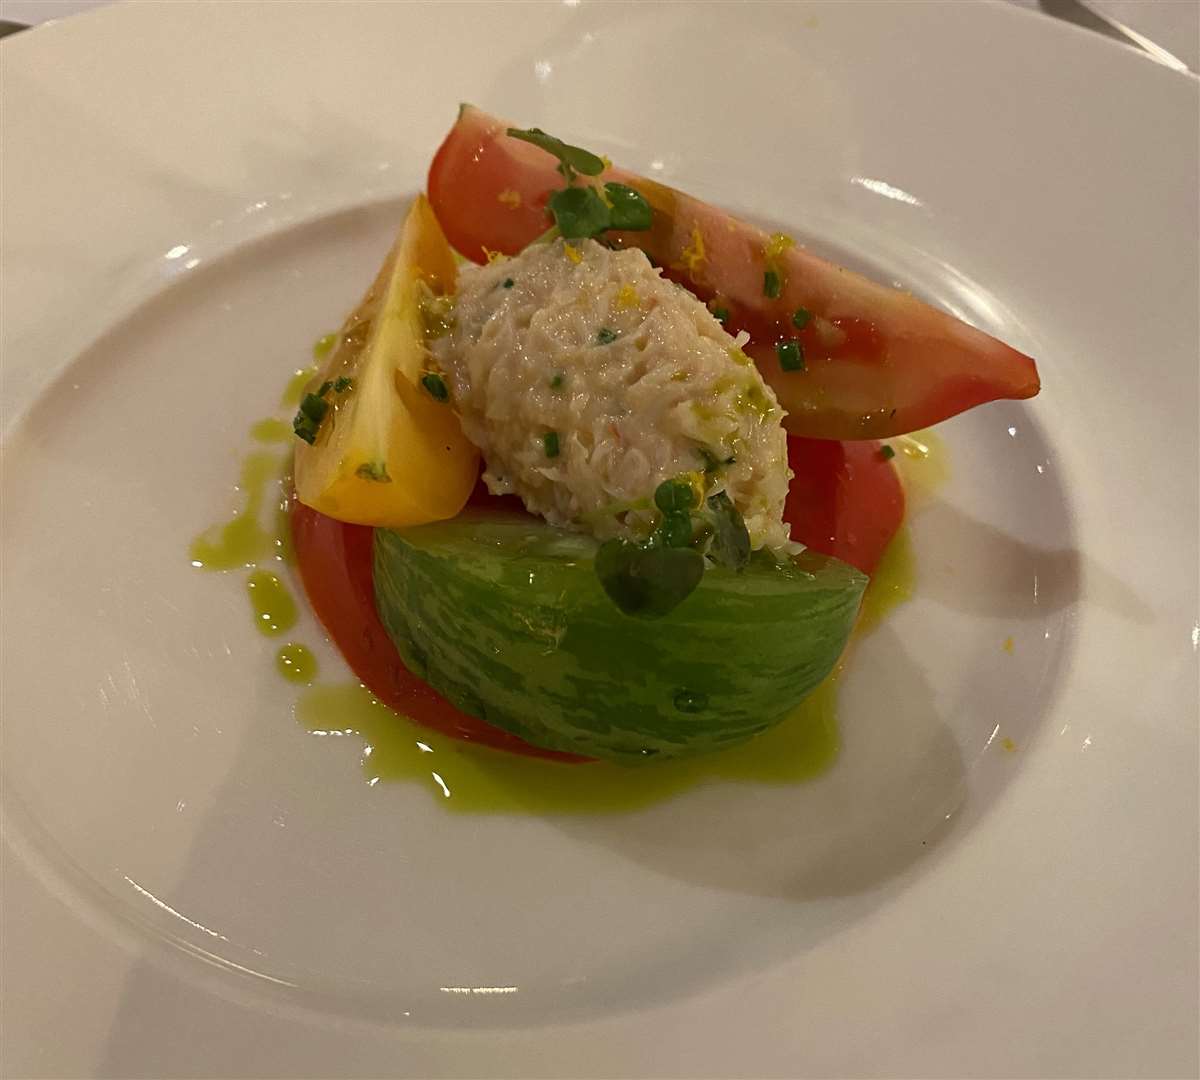 The crab, tomato and basil starter was a firm favourite paired with the Roman Road Chardonnay